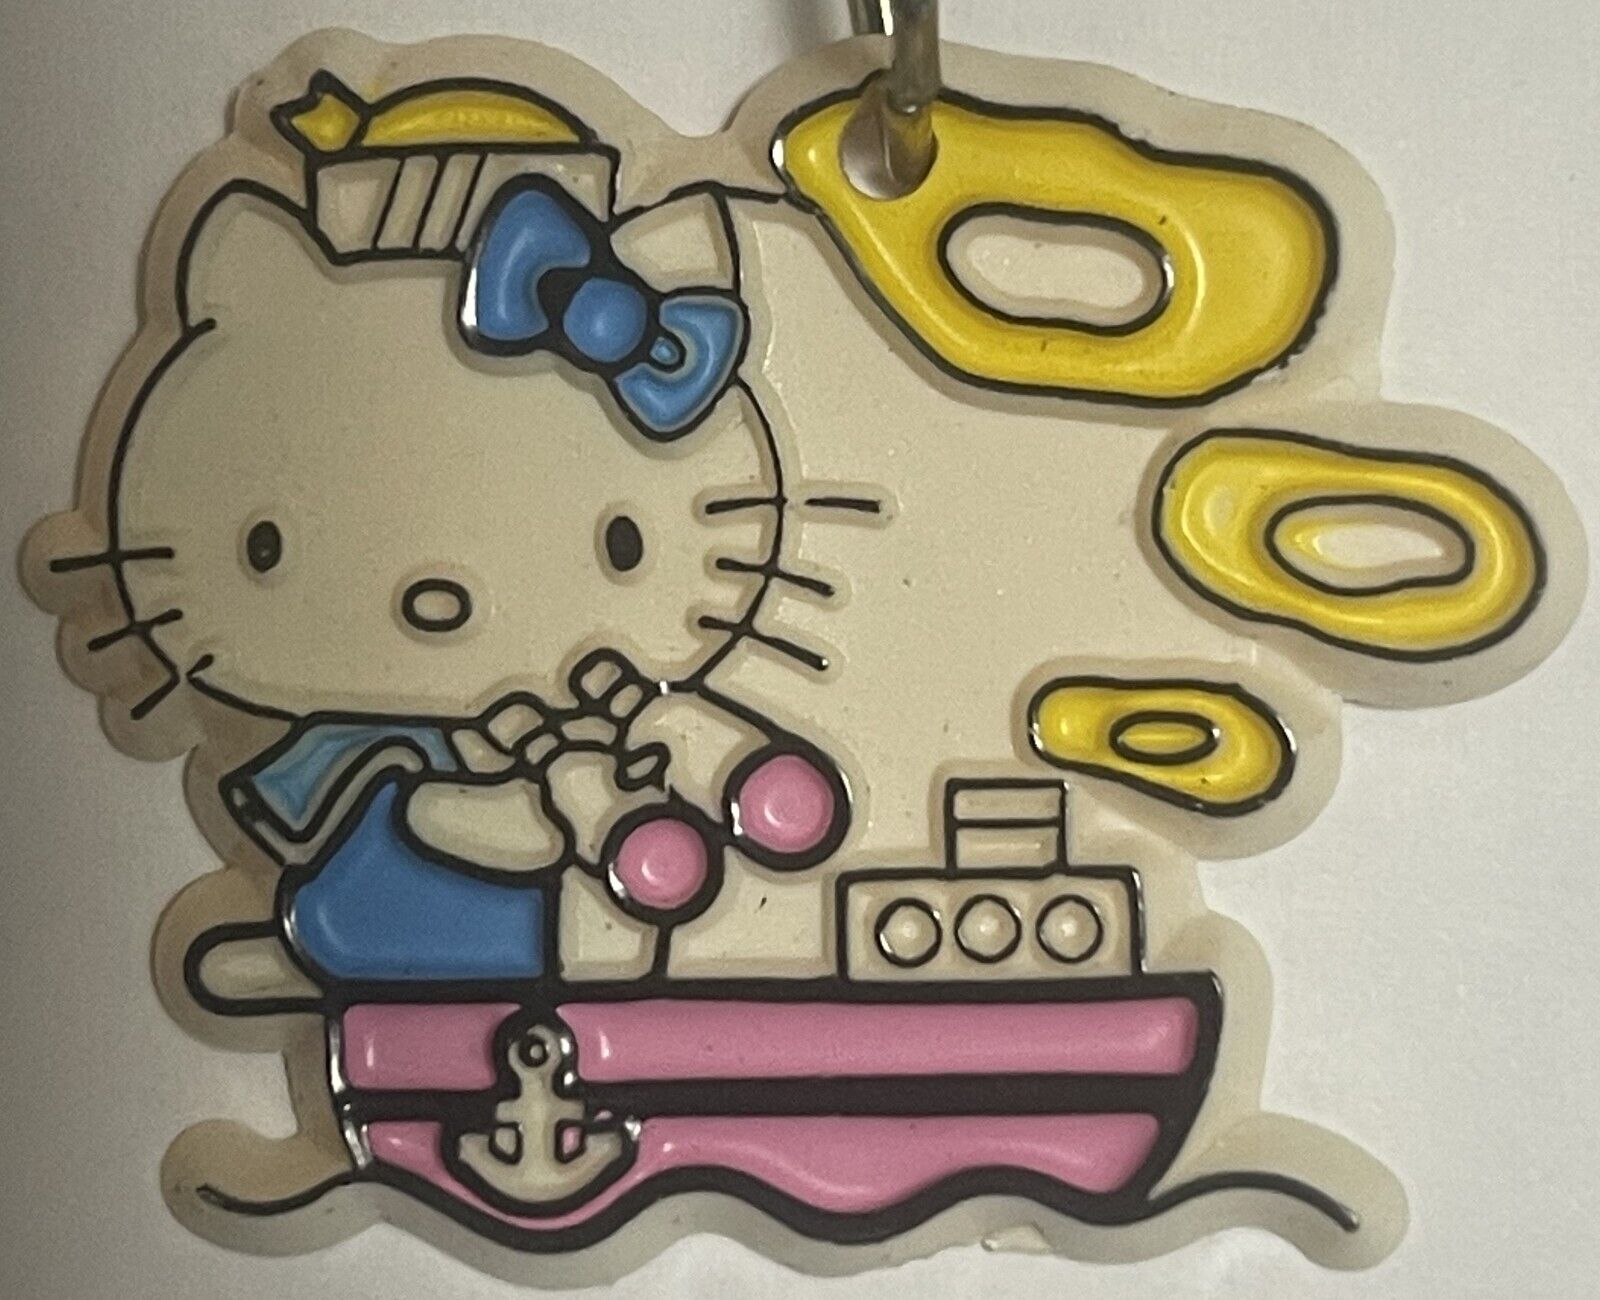 Rare 1976-1985 Hello Kitty Keychain, Unique Image and with Blue Bow!